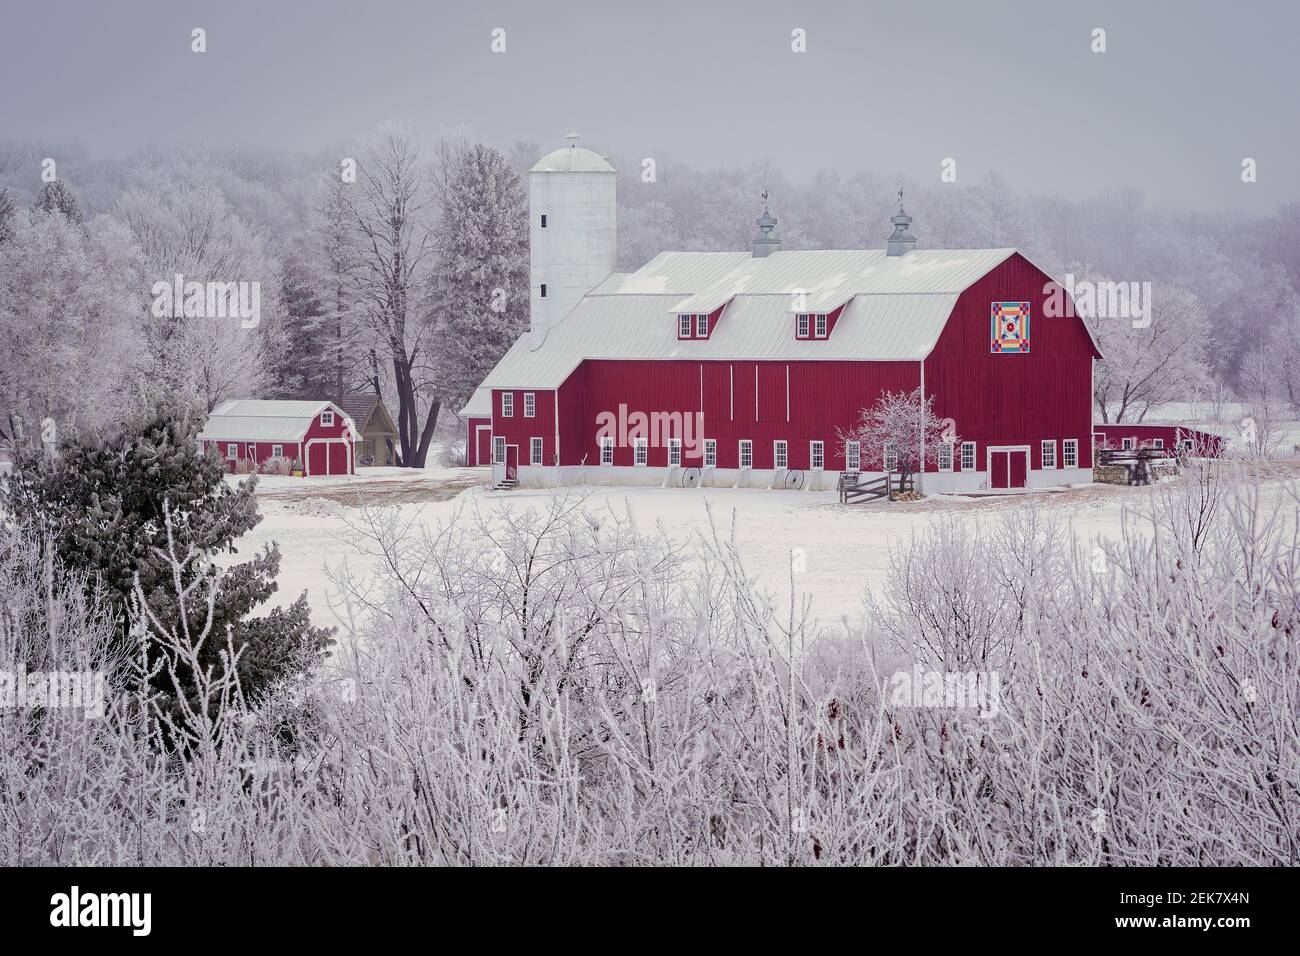 This outstanding dairy barn is situated along HY 42 just south of Egg Harbor in Door County Wi. Stock Photo